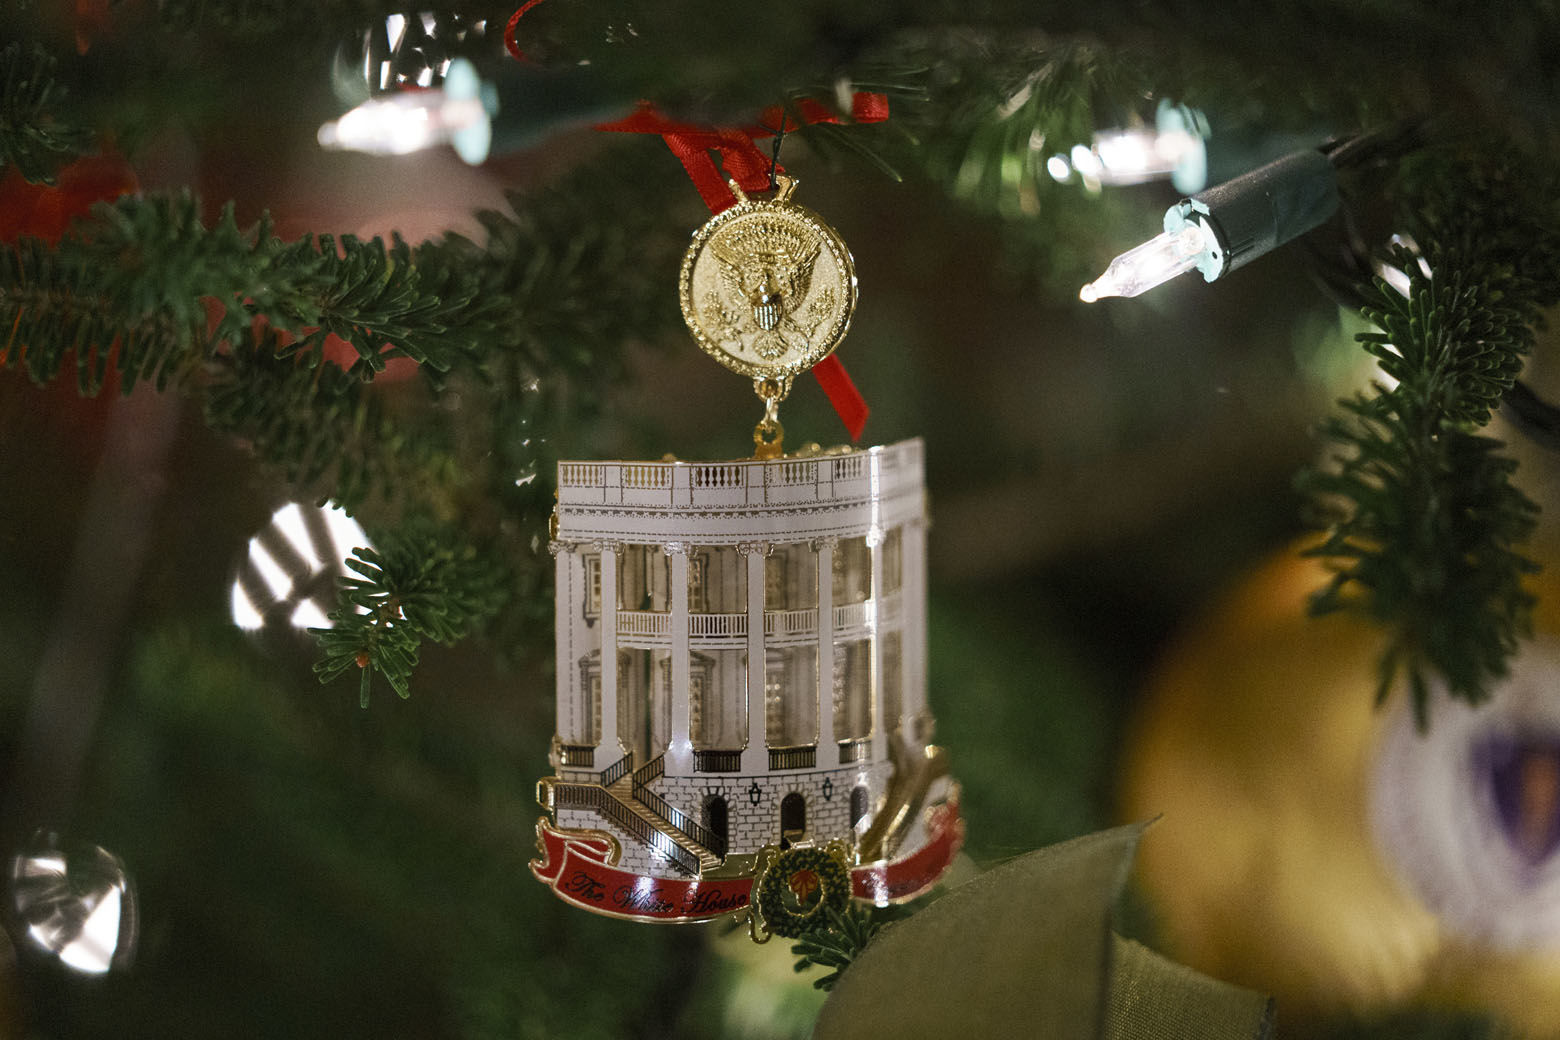 The Official 2018 White House Christmas Ornament is seen during the 2018 Christmas Press Preview at the White House in Washington, Monday, Nov. 26, 2018. Christmas has arrived at the White House. First lady Melania Trump unveiled the 2018 White House holiday decor on Monday. She designed the decor, which features a theme of "American Treasures." (AP Photo/Carolyn Kaster)